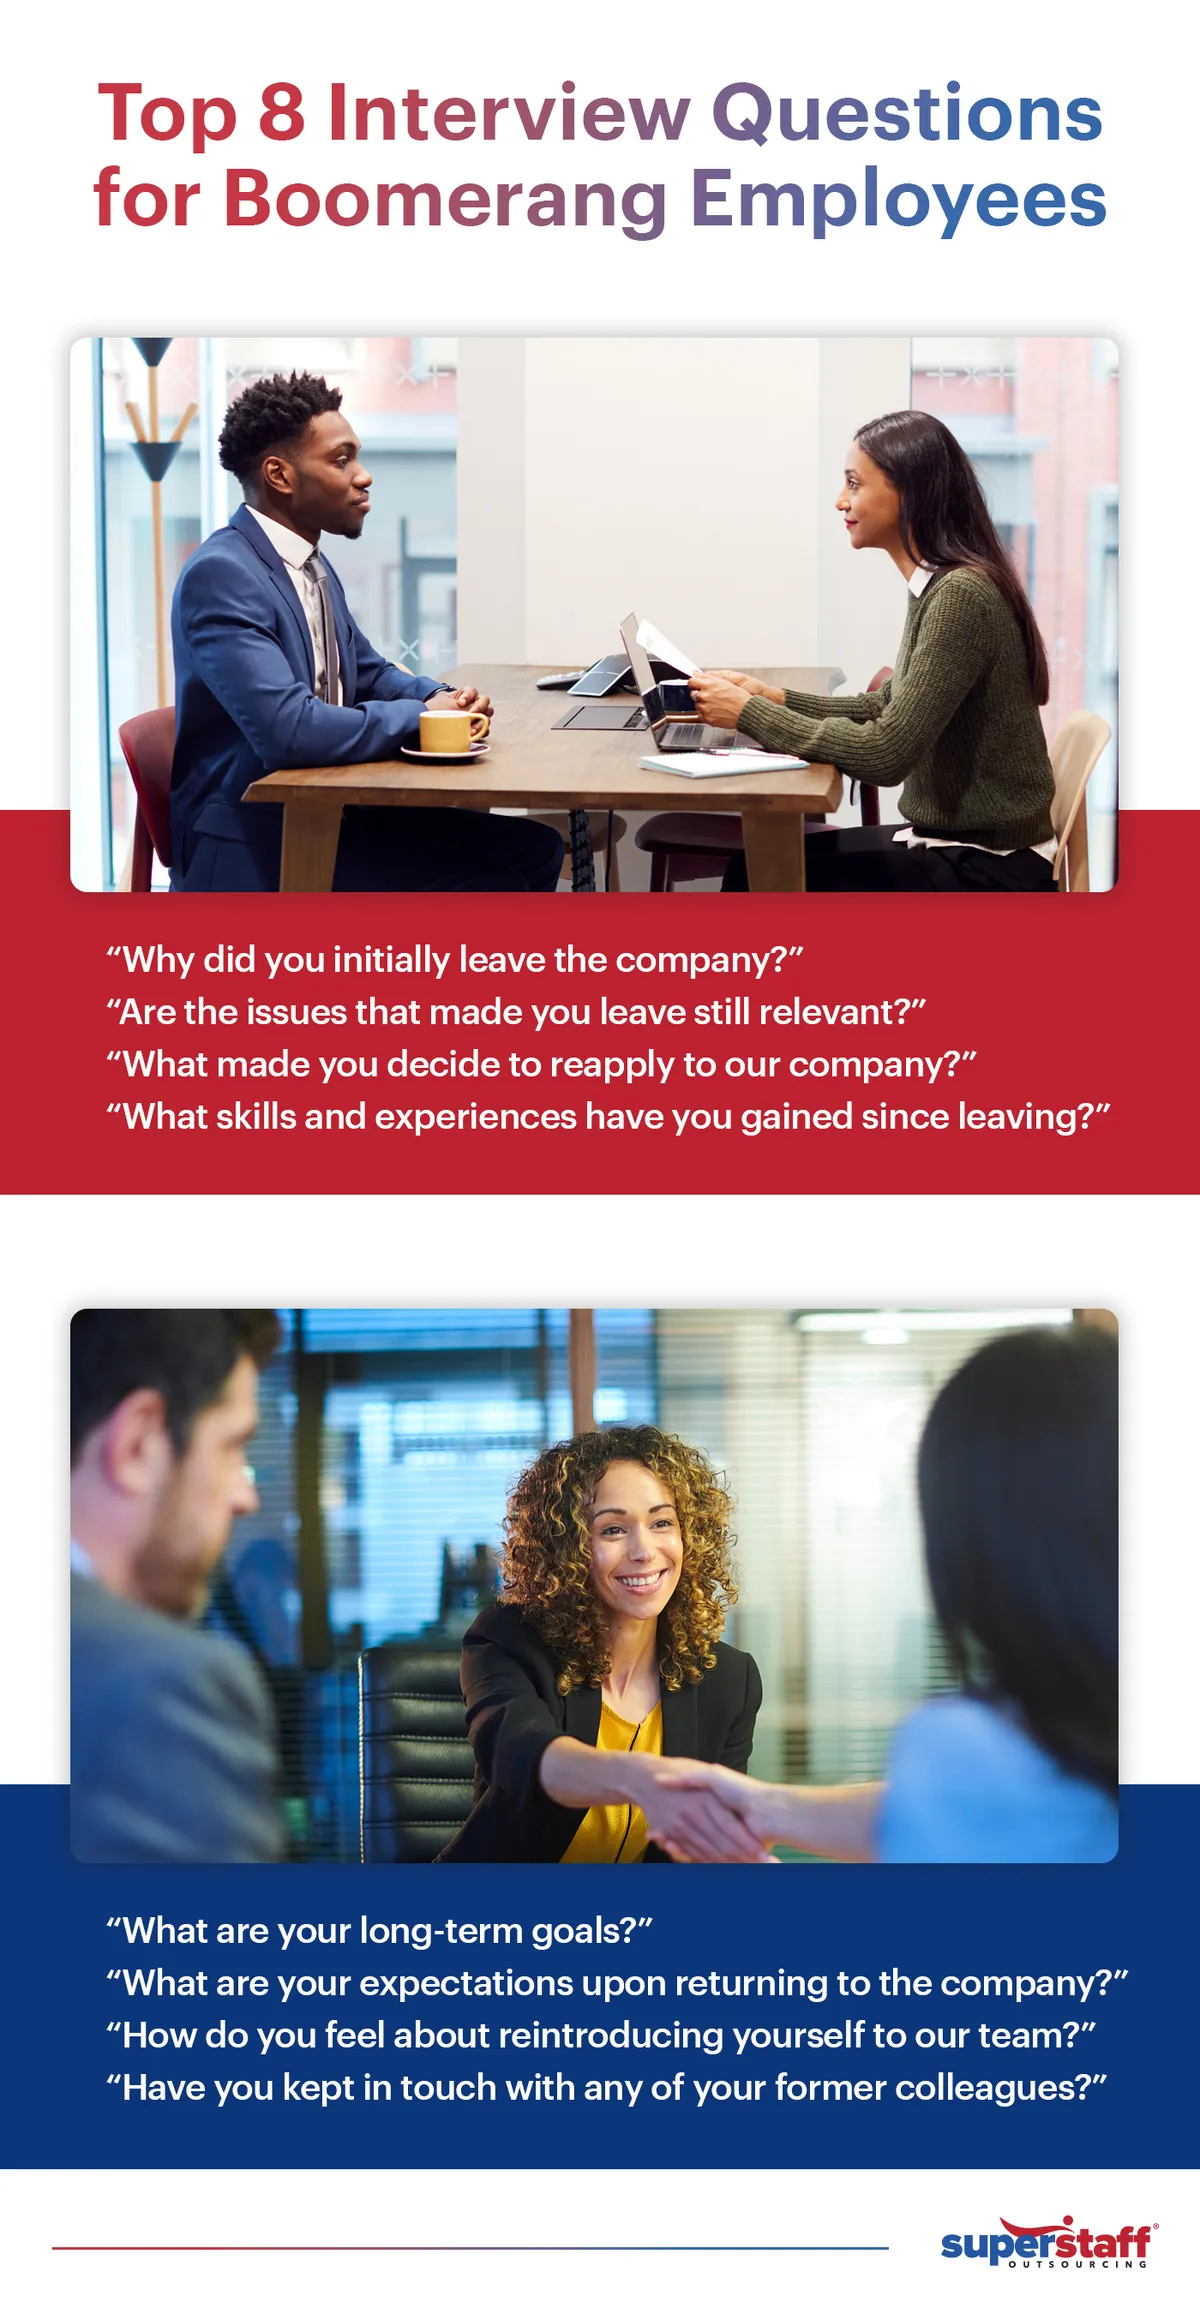 HR Professionals are interviewing job applicants. Image caption says: Interviewing Boomerang Employees? Here Are the 8 Questions You Should Ask